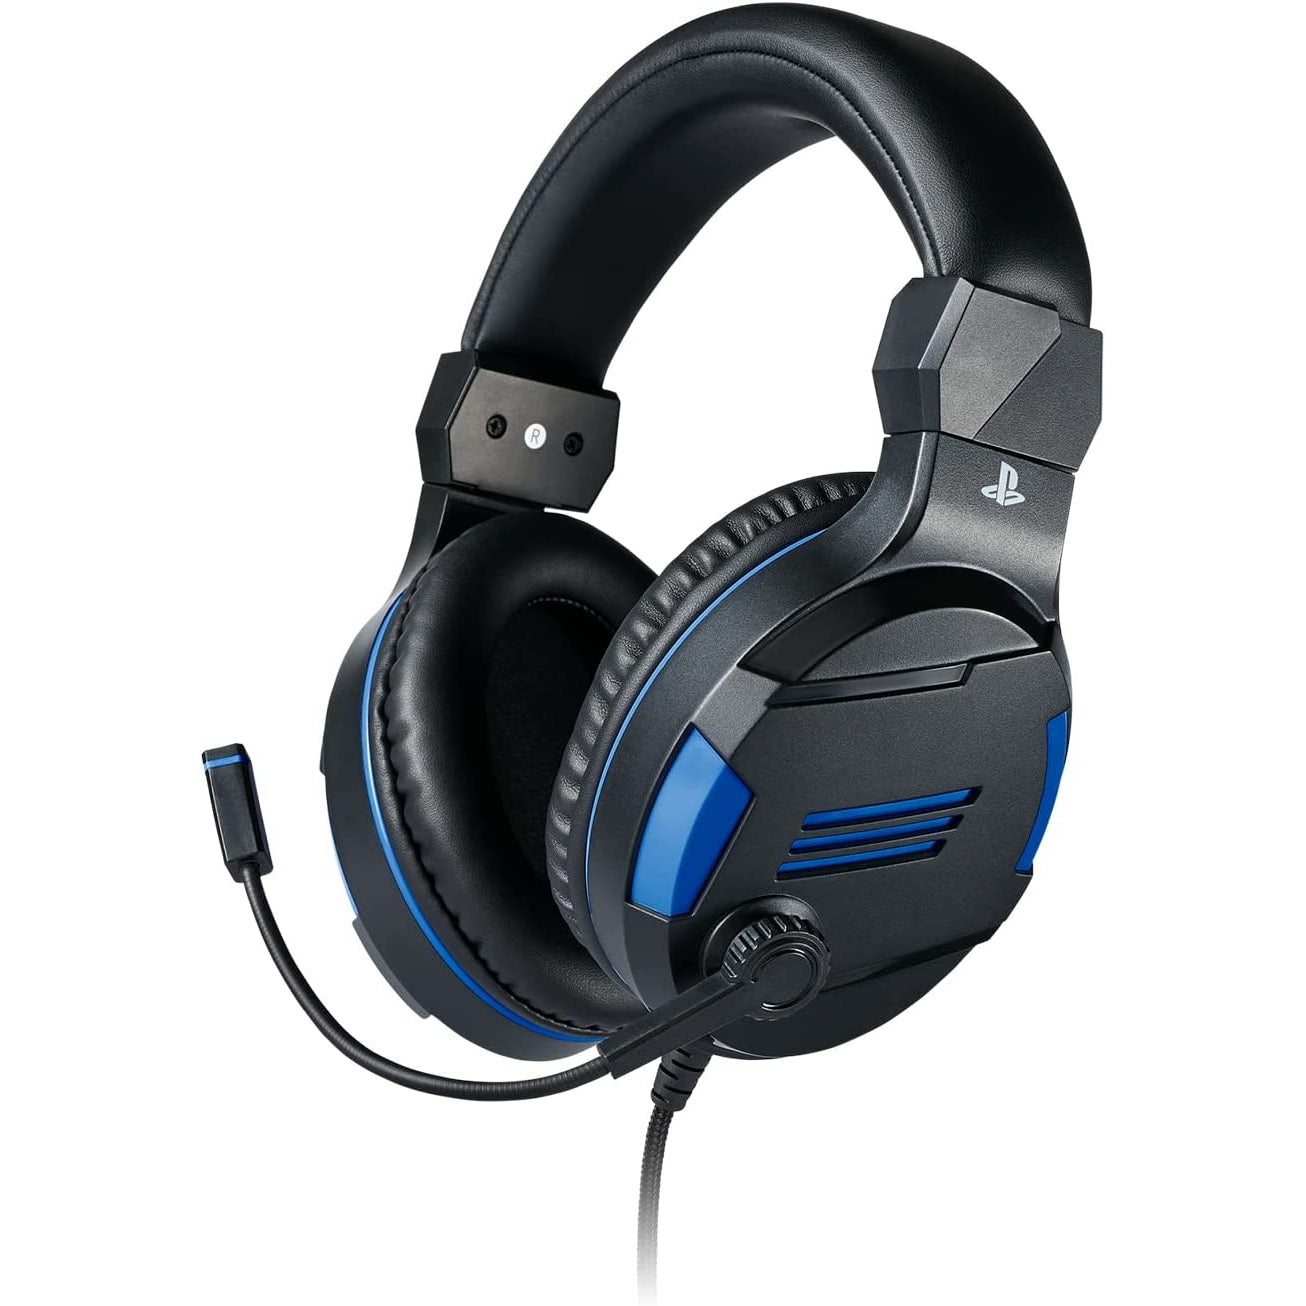 BigBen Stereo Gaming Headset for PS4